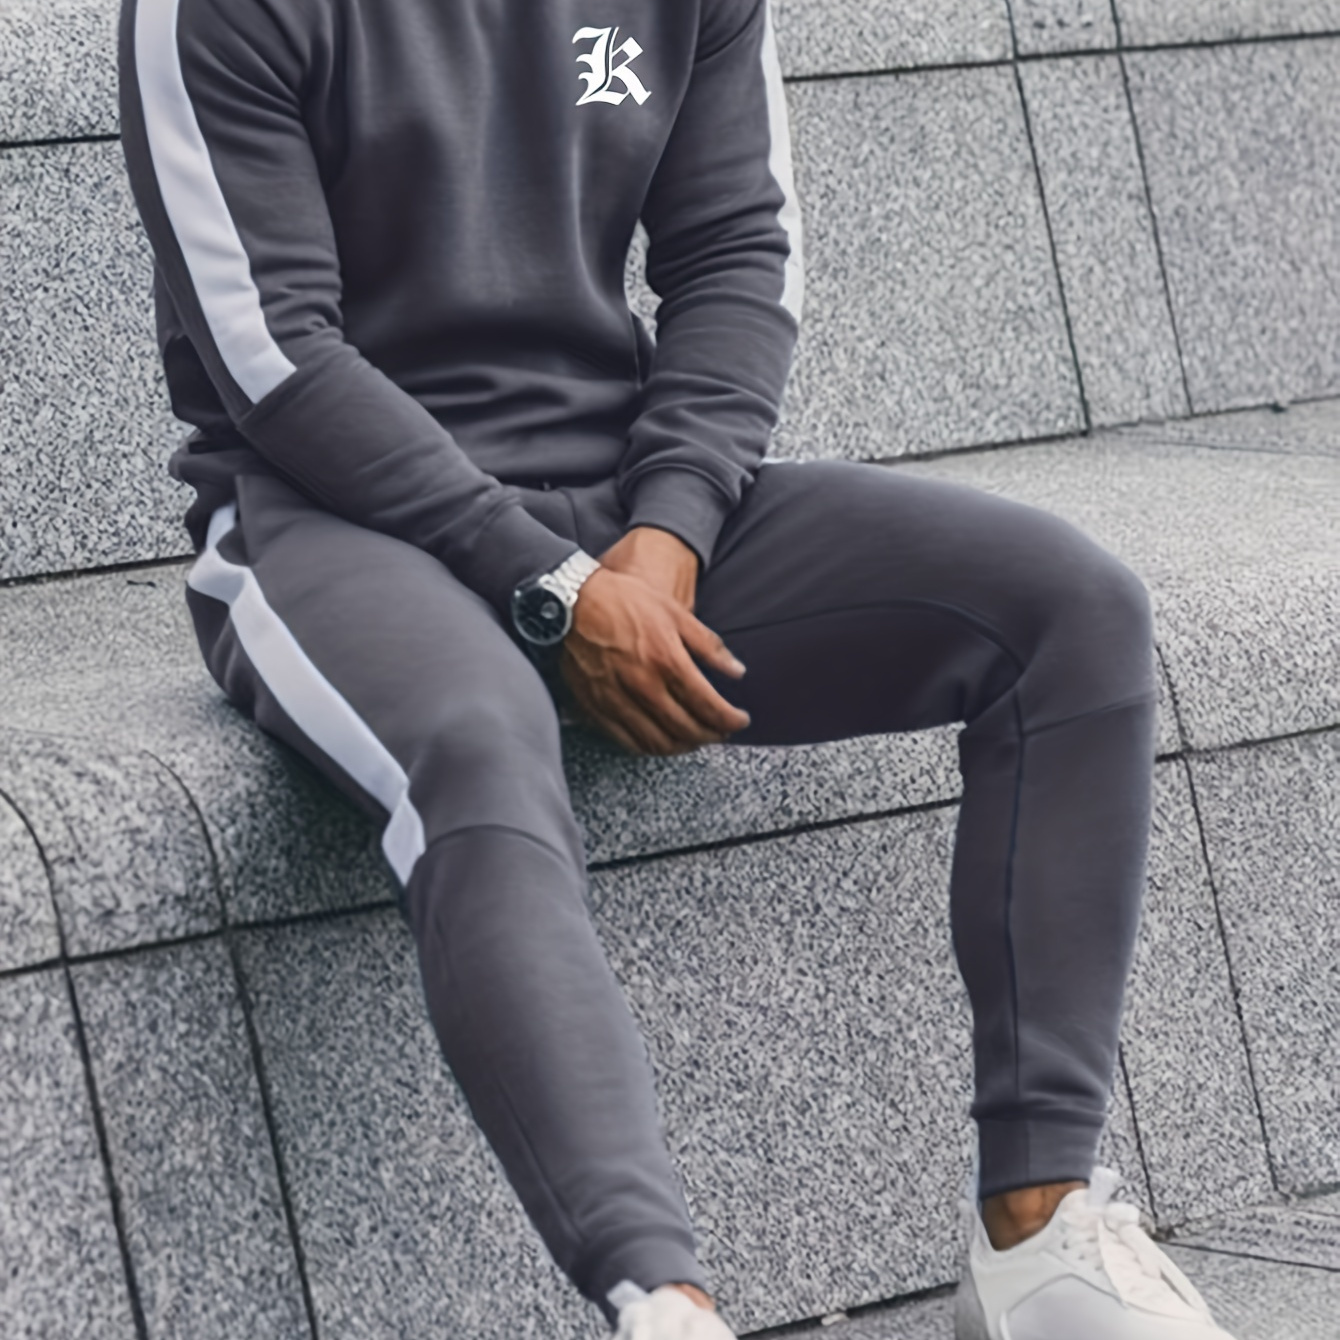 

2-piece Men's Color Block Spring Fall Sports Outfit Set, Men's Casual Printed Long Sleeve Round Neck Sweatshirt & Drawstring Sweatpants Co Ord Set